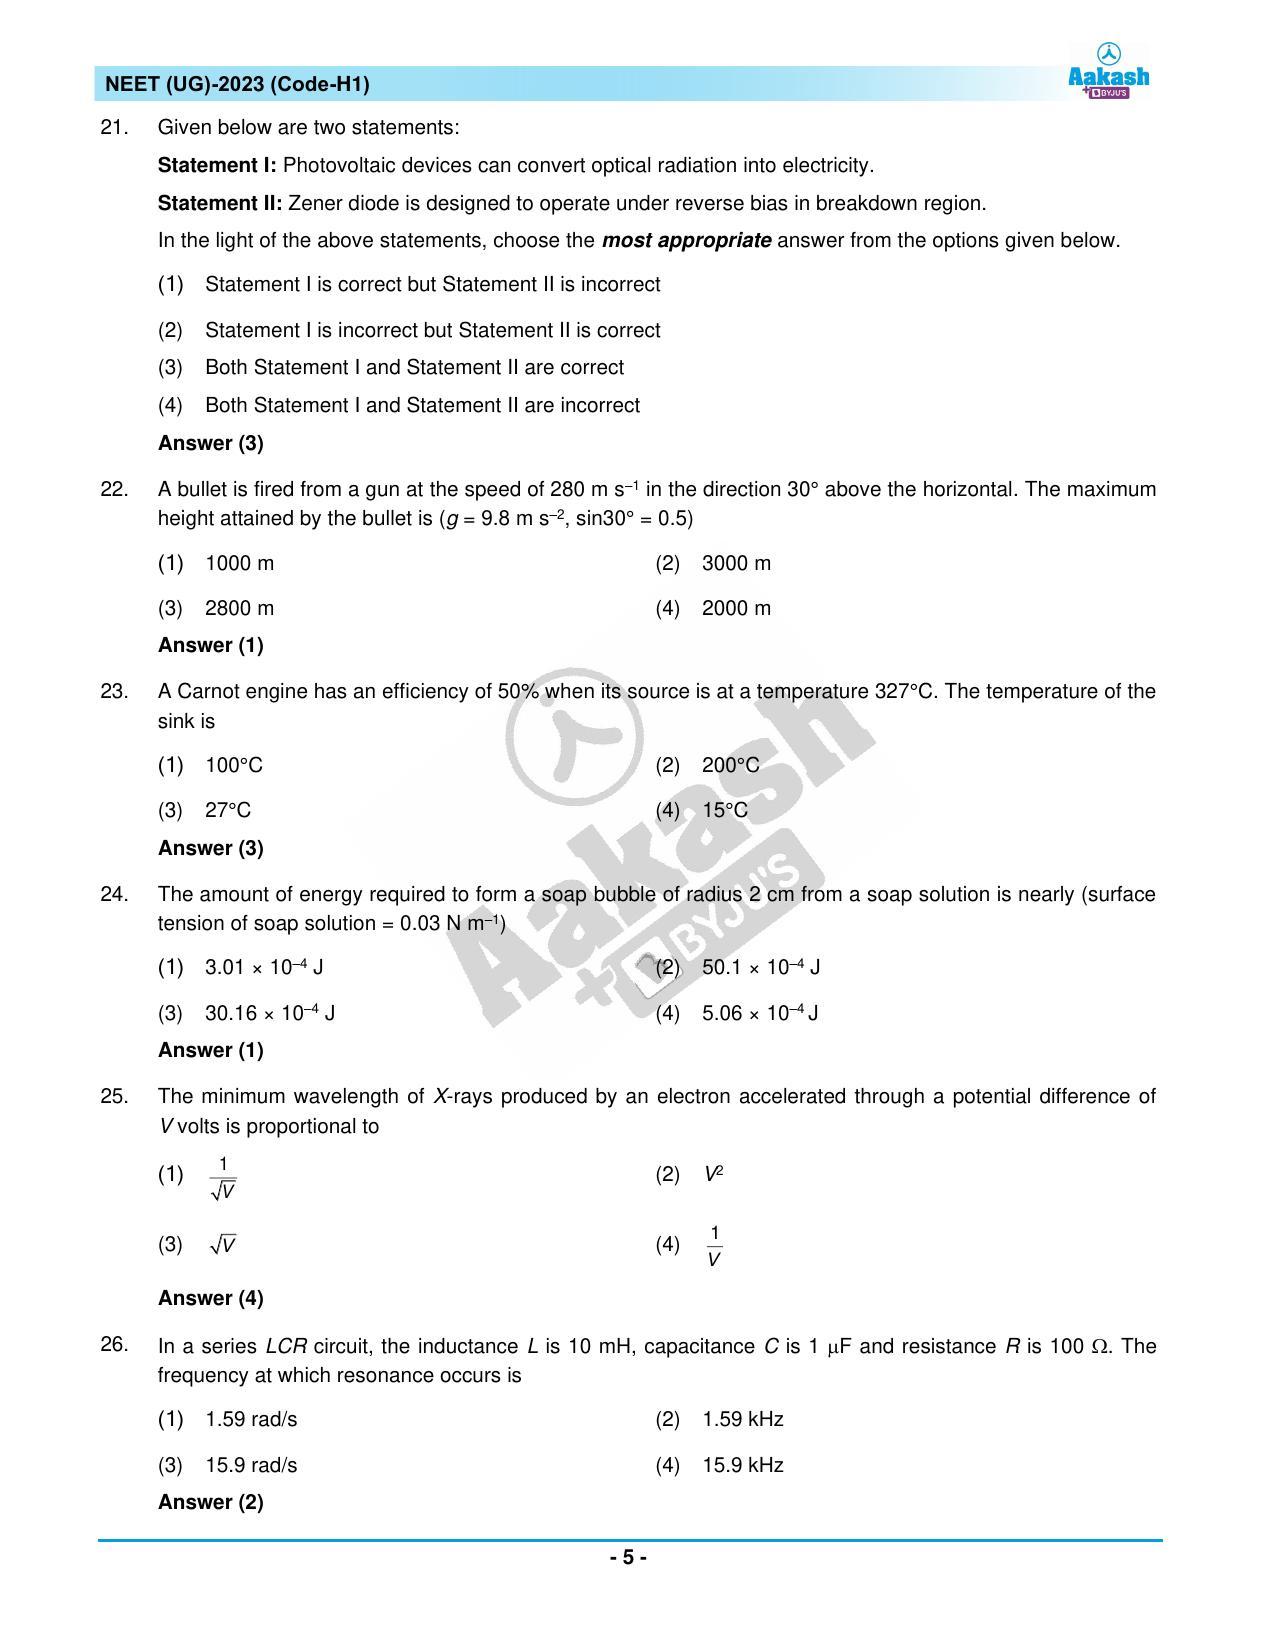 NEET 2023 Question Paper H1 - Page 5